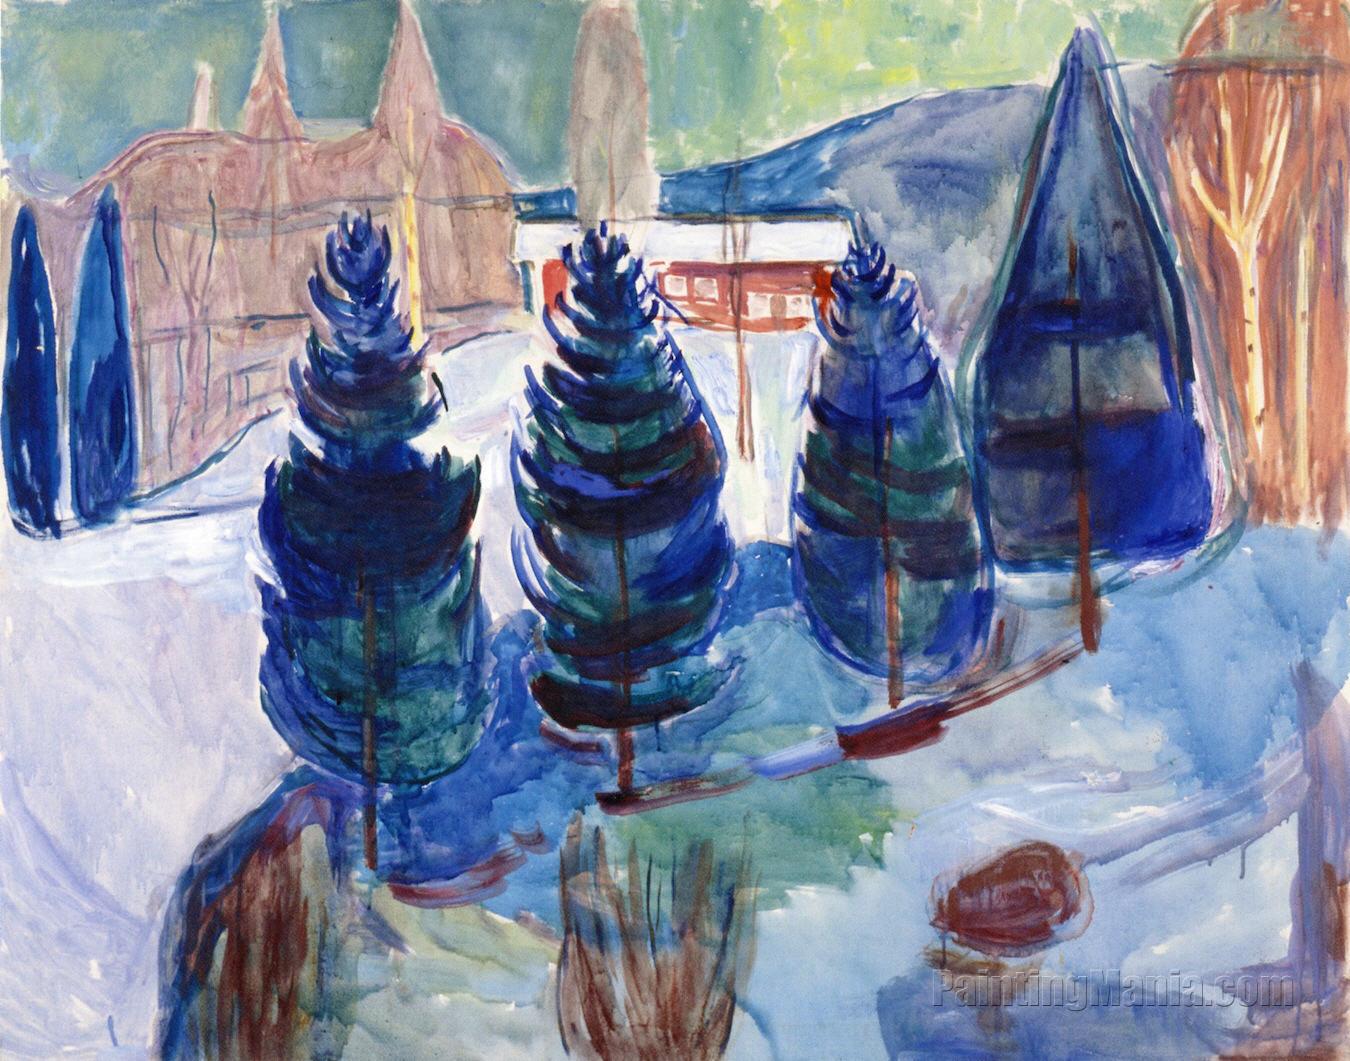 Red House and Spruces 1927